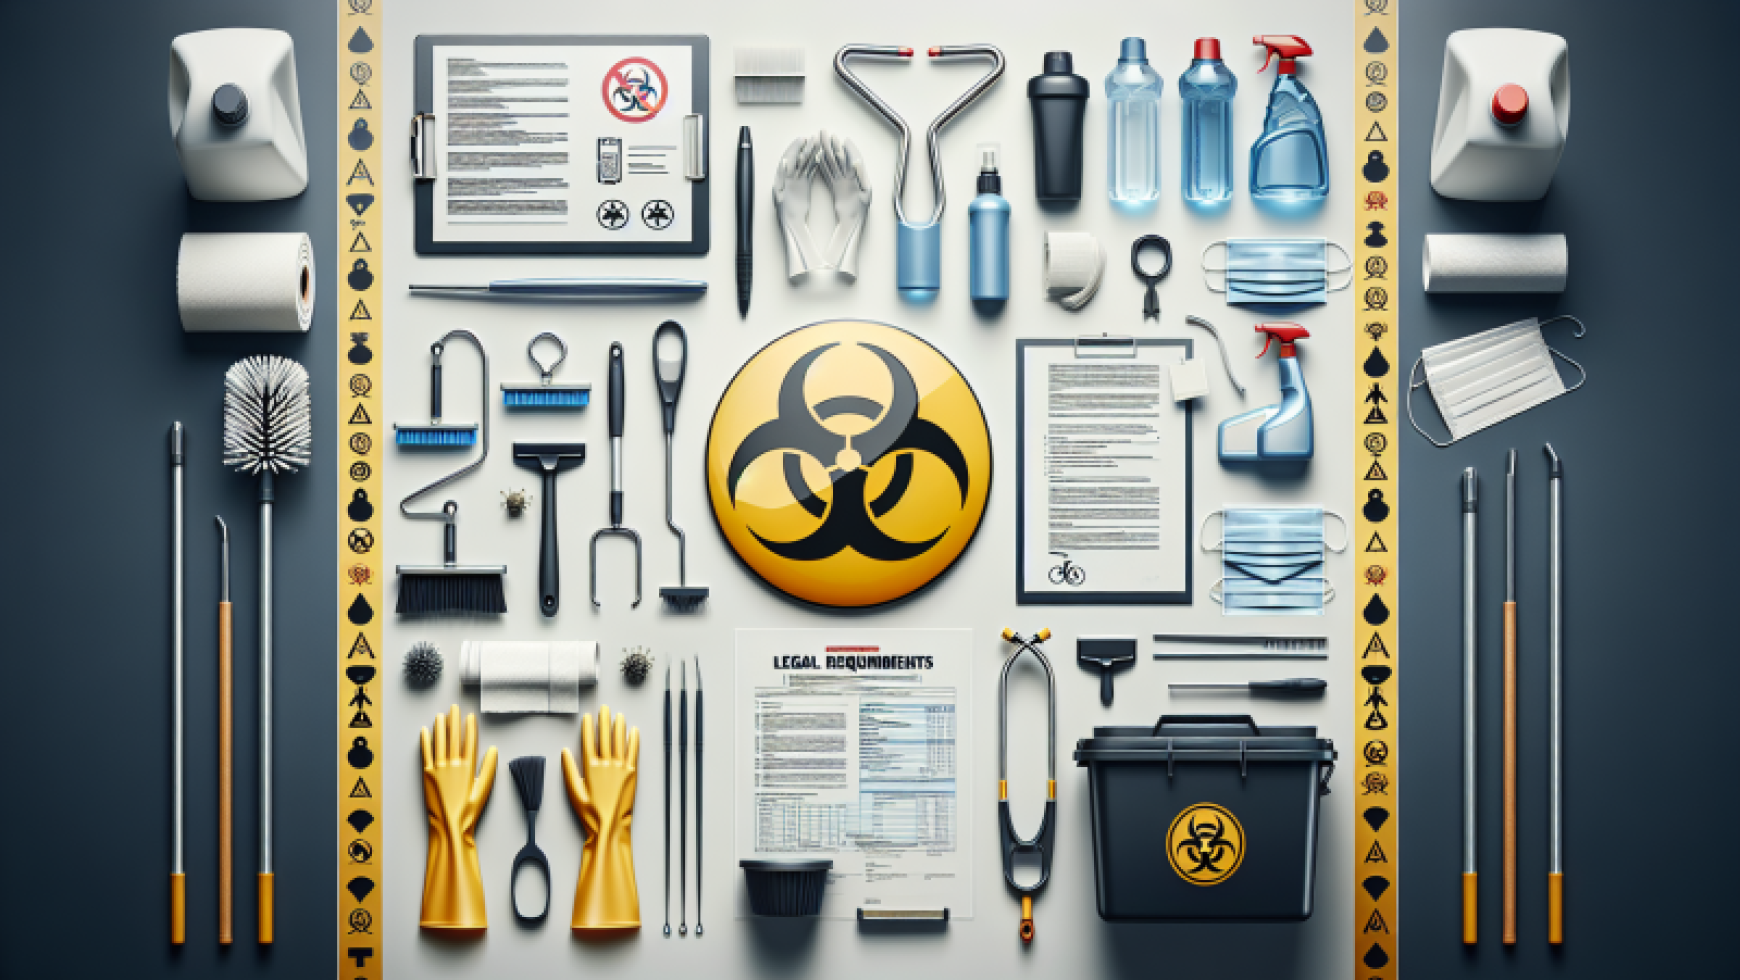 Biohazard Clean Up: Legal Requirements